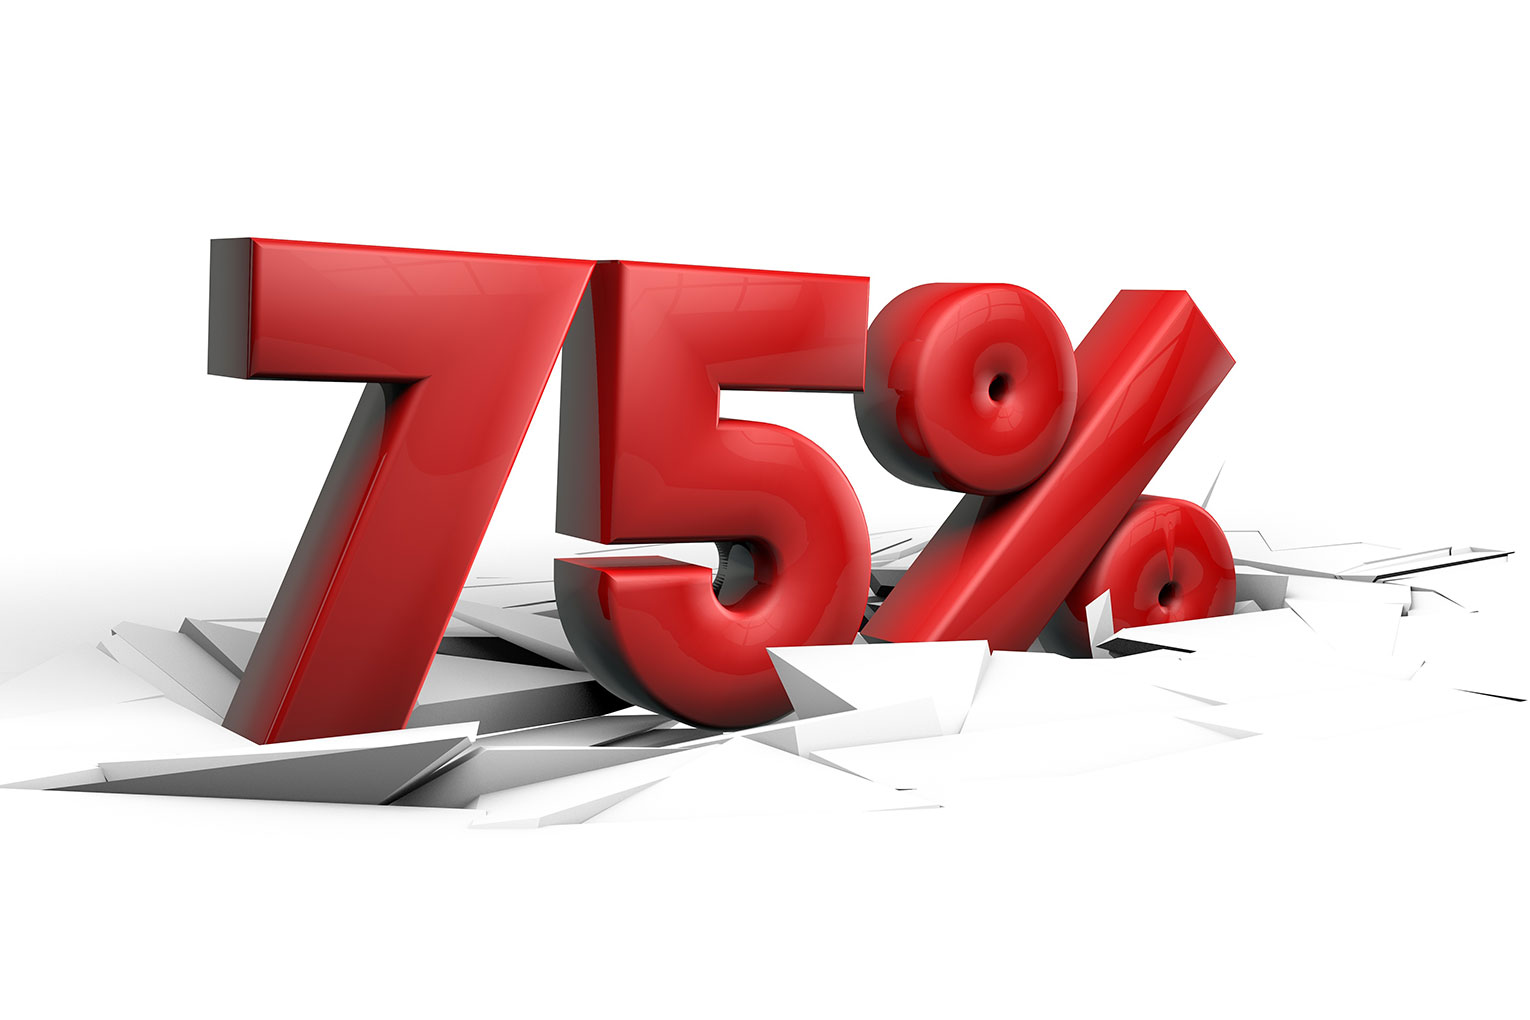 ... rate 75% loan-to-value (LTV) mortgages by 0.10 percentage points